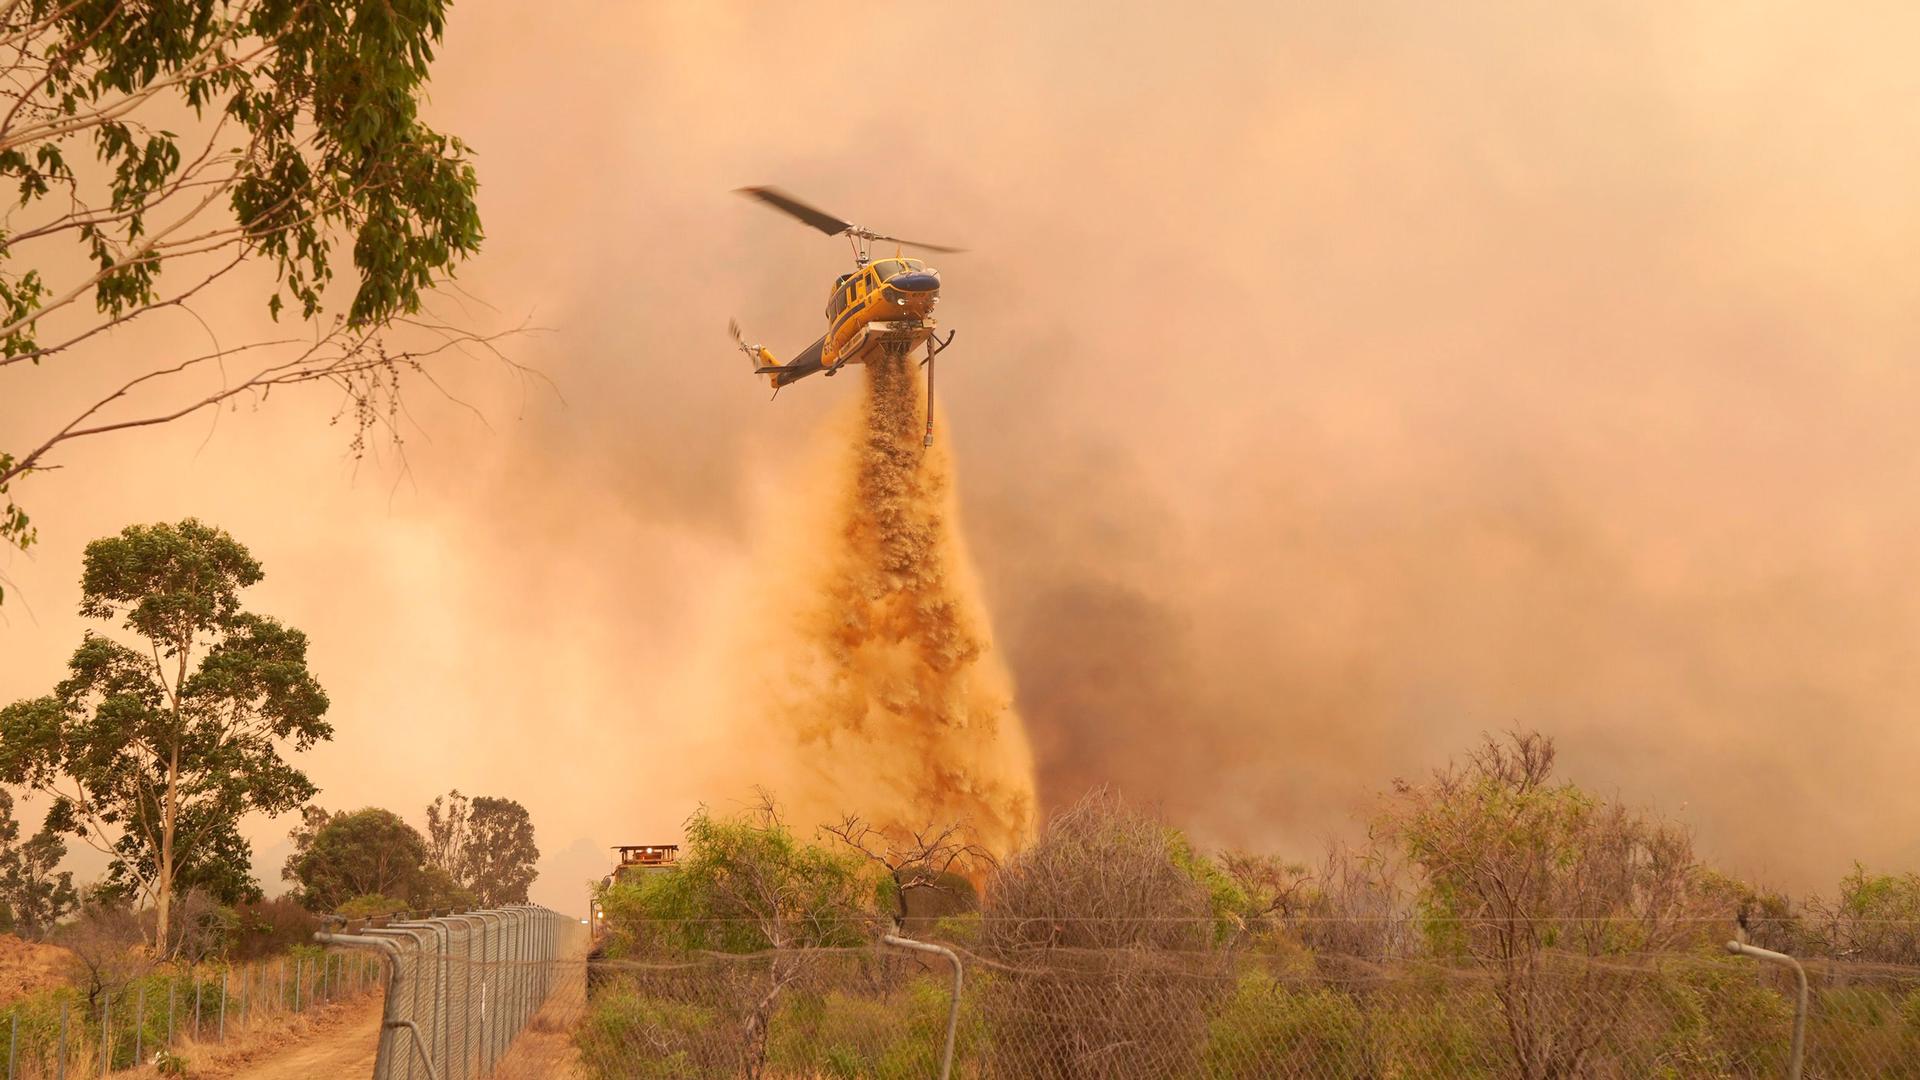 A helicopter is shown flying above a wooded area with a large metal fence on one side and dropping fire retardant.